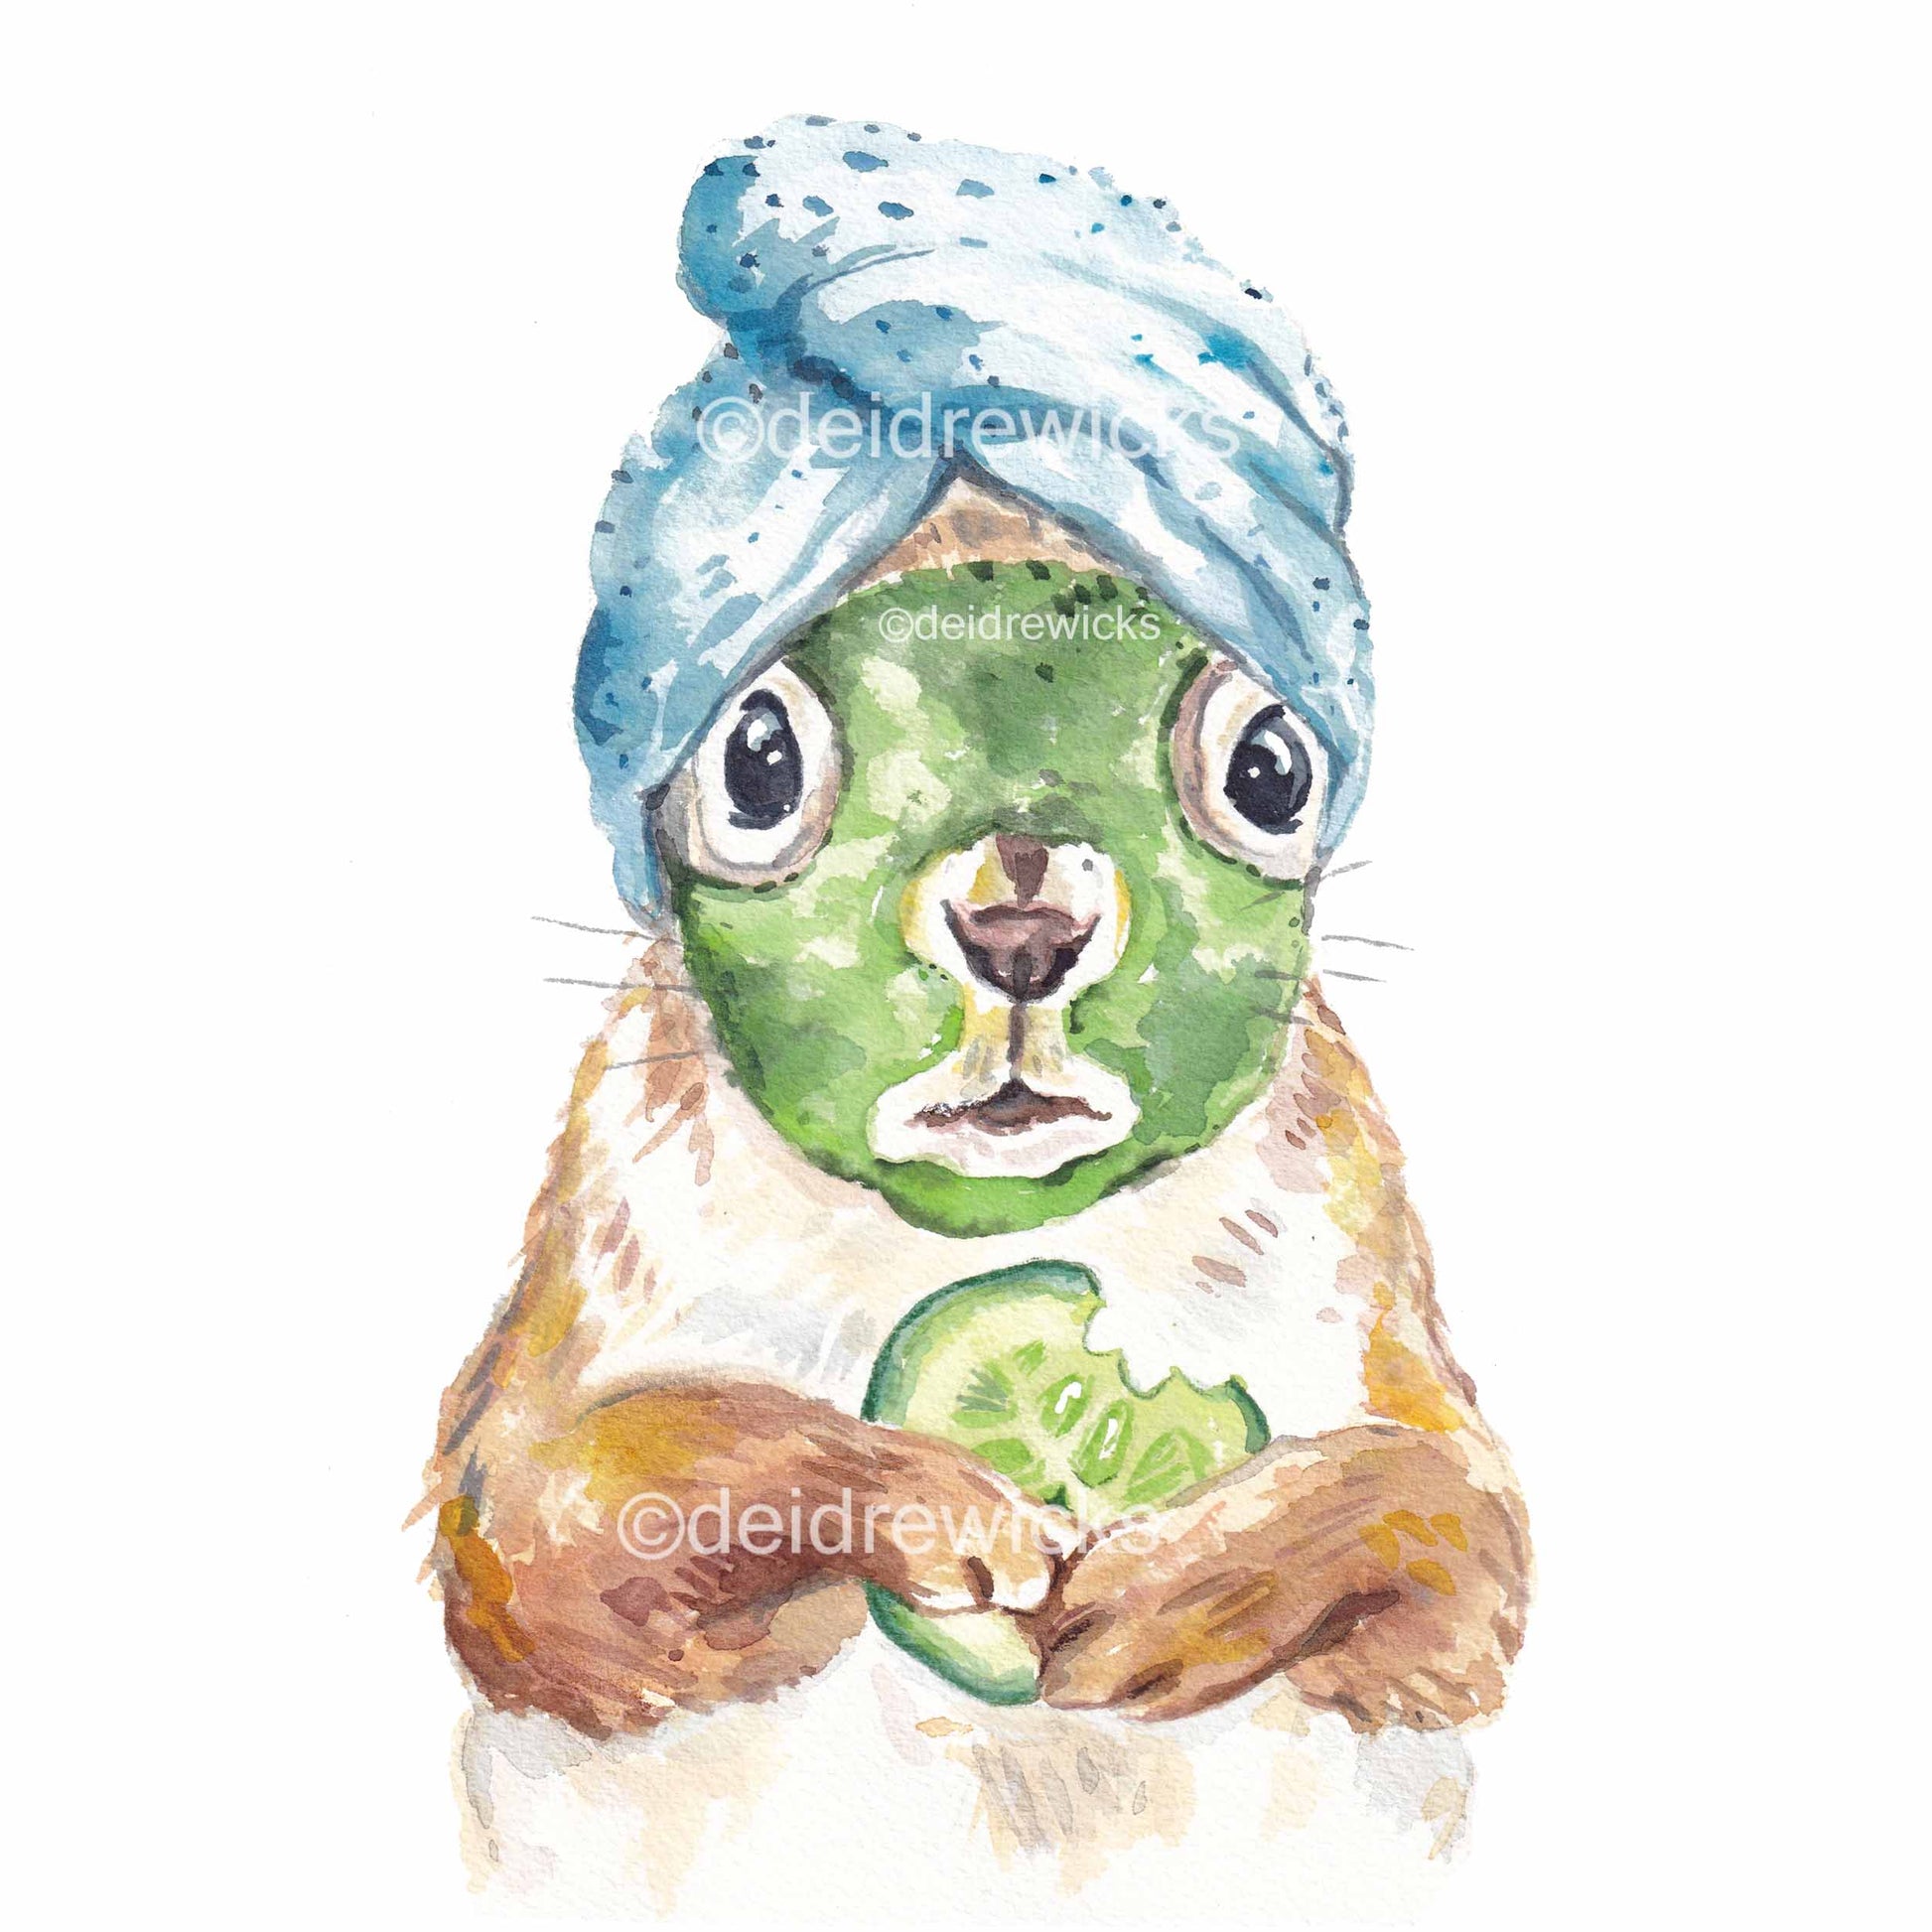 Watercolour painting of a squirrel wearing a clay face mask and holding a cucumber slice. Art by Deidre Wicks